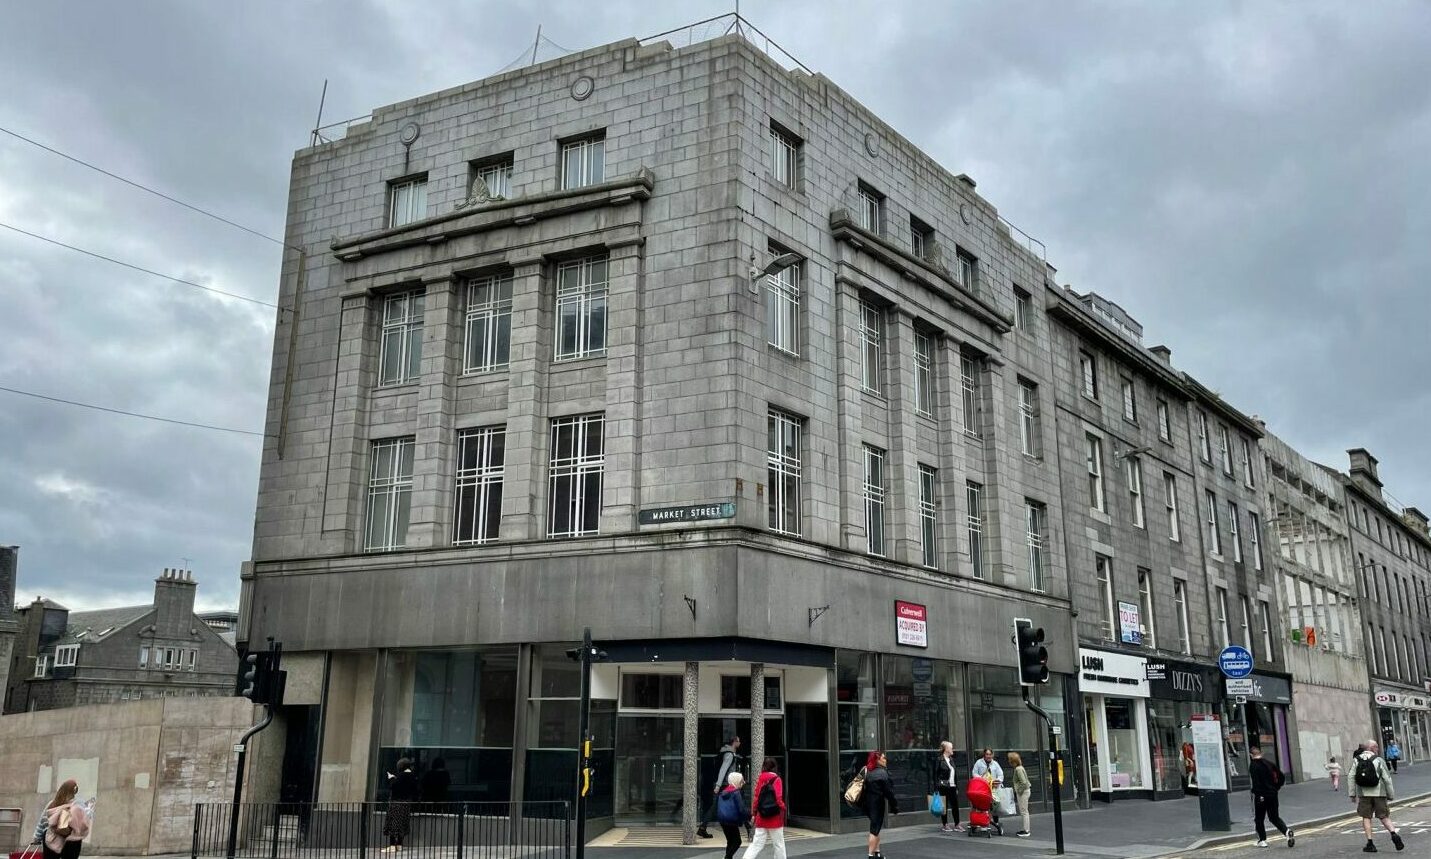 The former Caffe Nero building on Union Street in Aberdeen